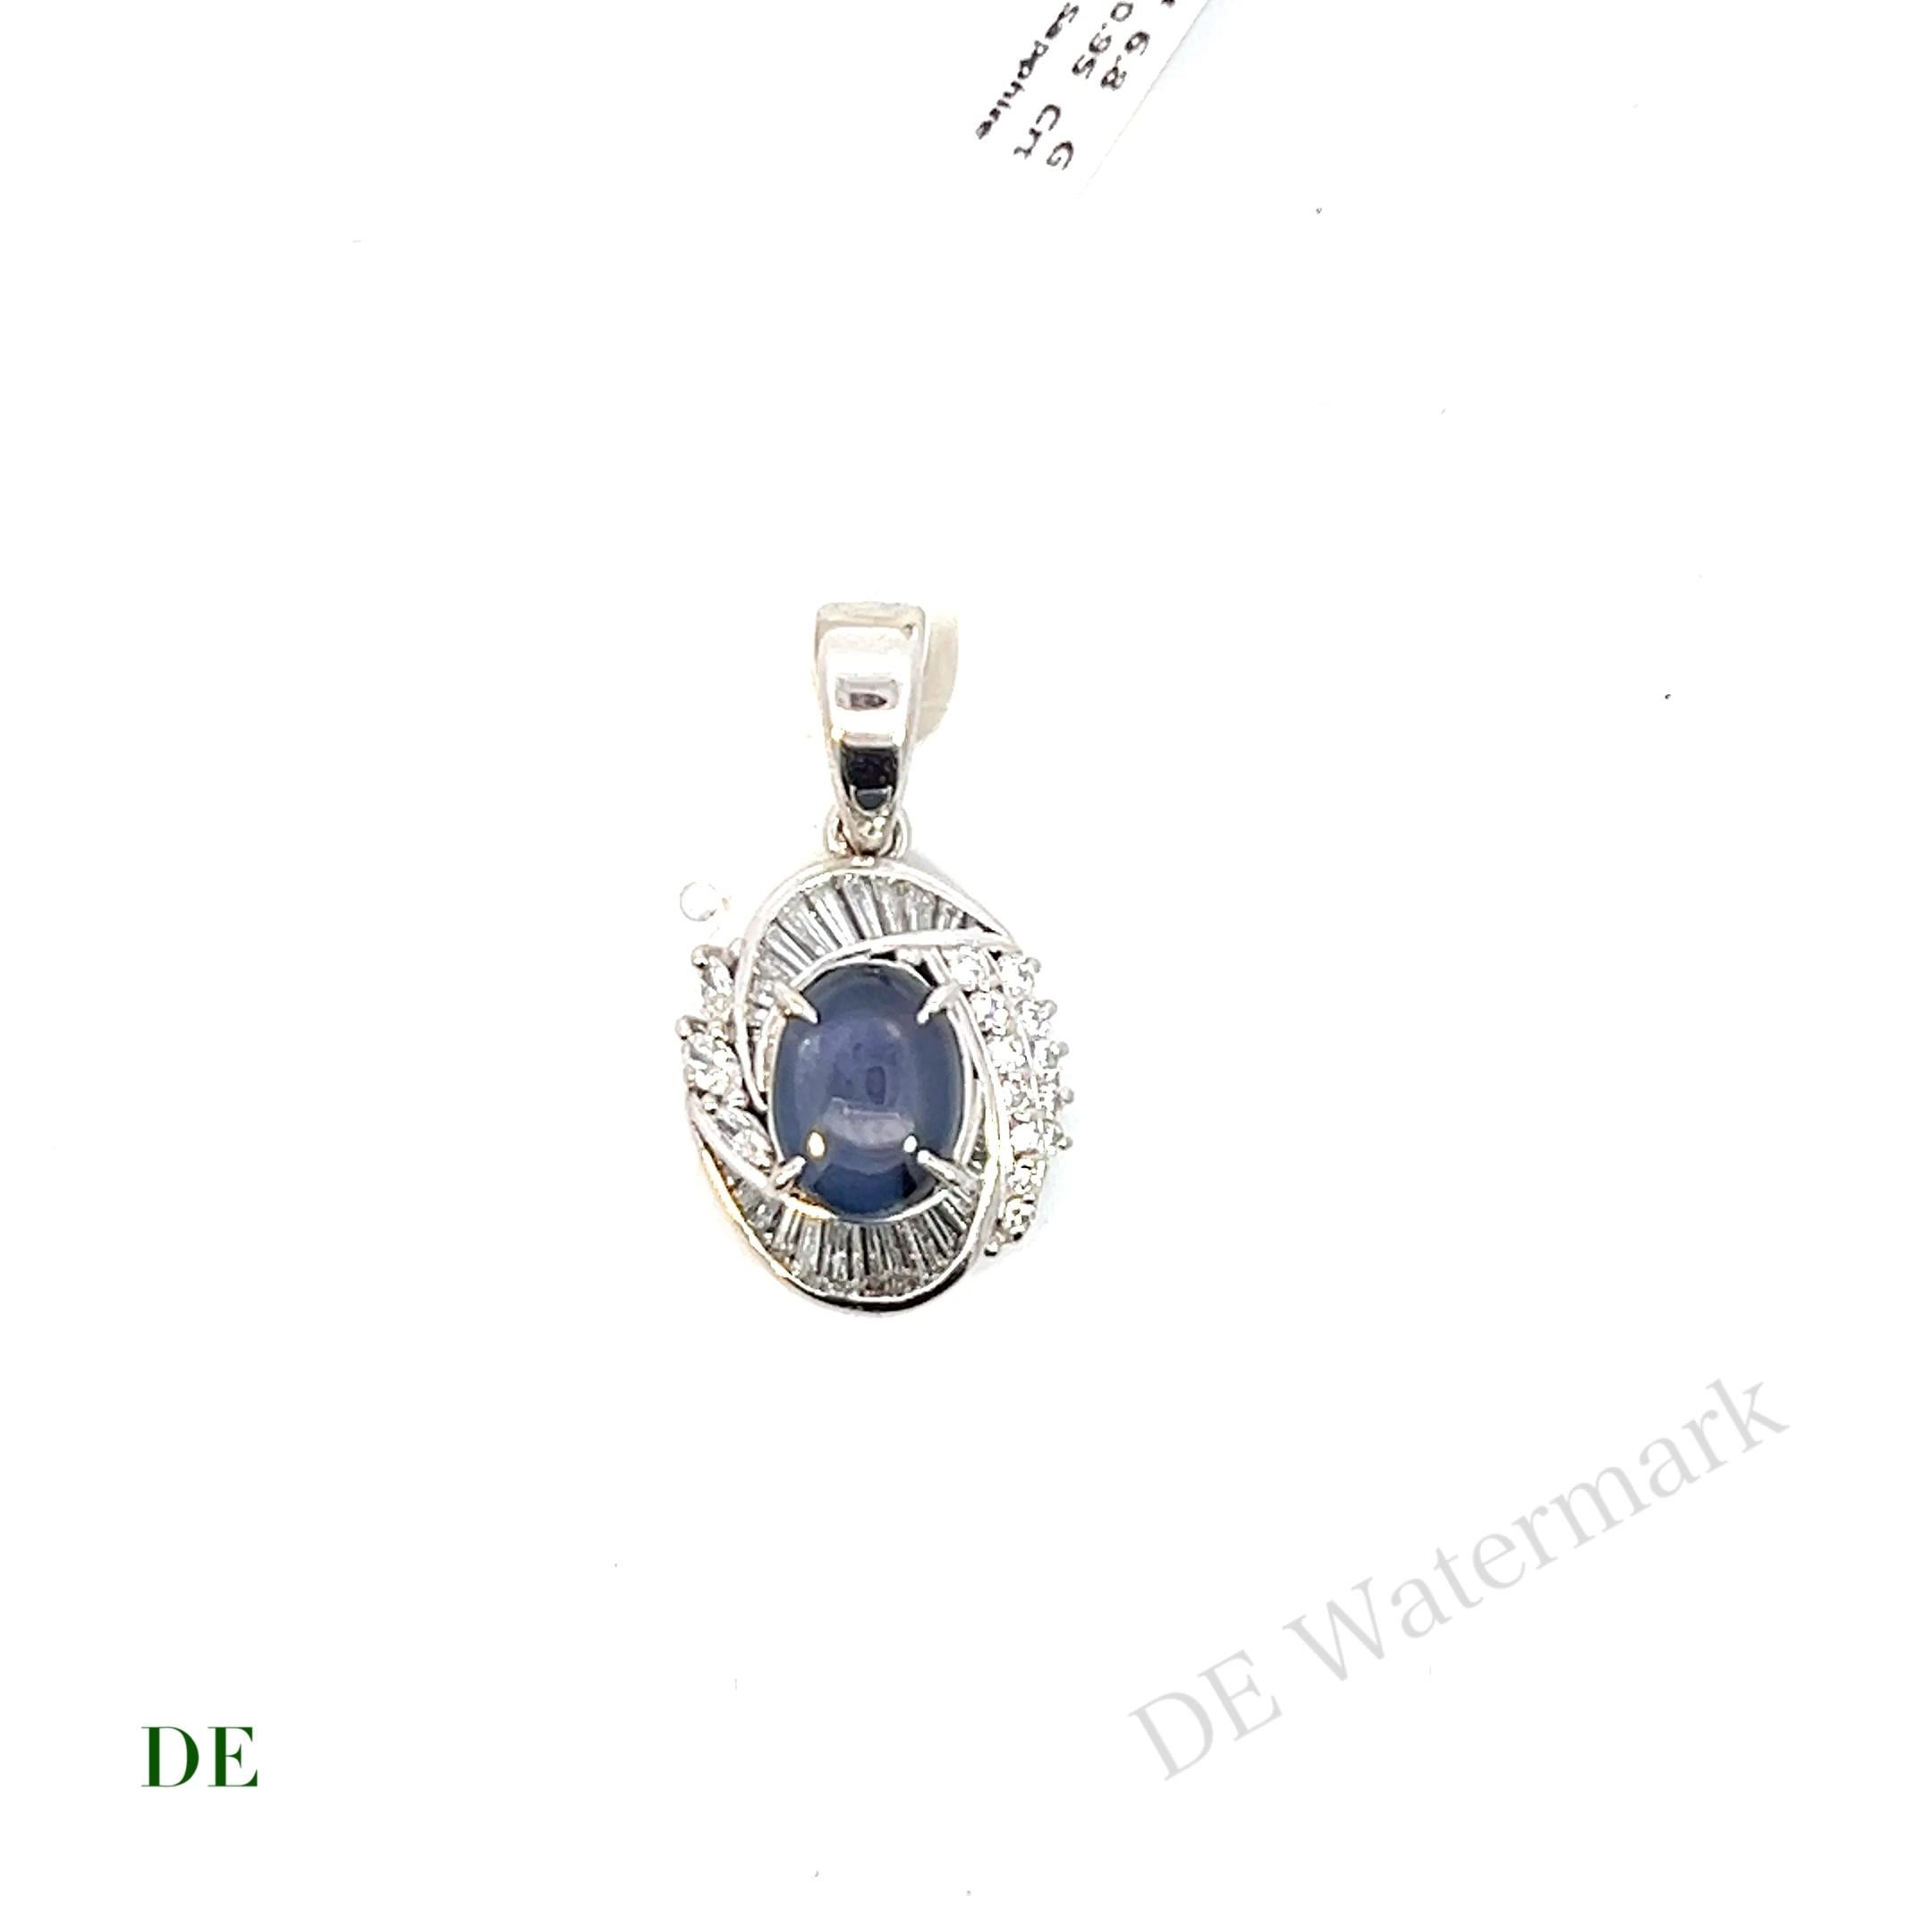 Platinum 4.35 crt Blue Star Sapphire. with .95 crt Diamond Pendant

Introducing our stunning Platinum Blue Star Sapphire and Diamond Pendant, a remarkable piece that showcases a captivating 4.35 carat blue star sapphire accompanied by a sparkling